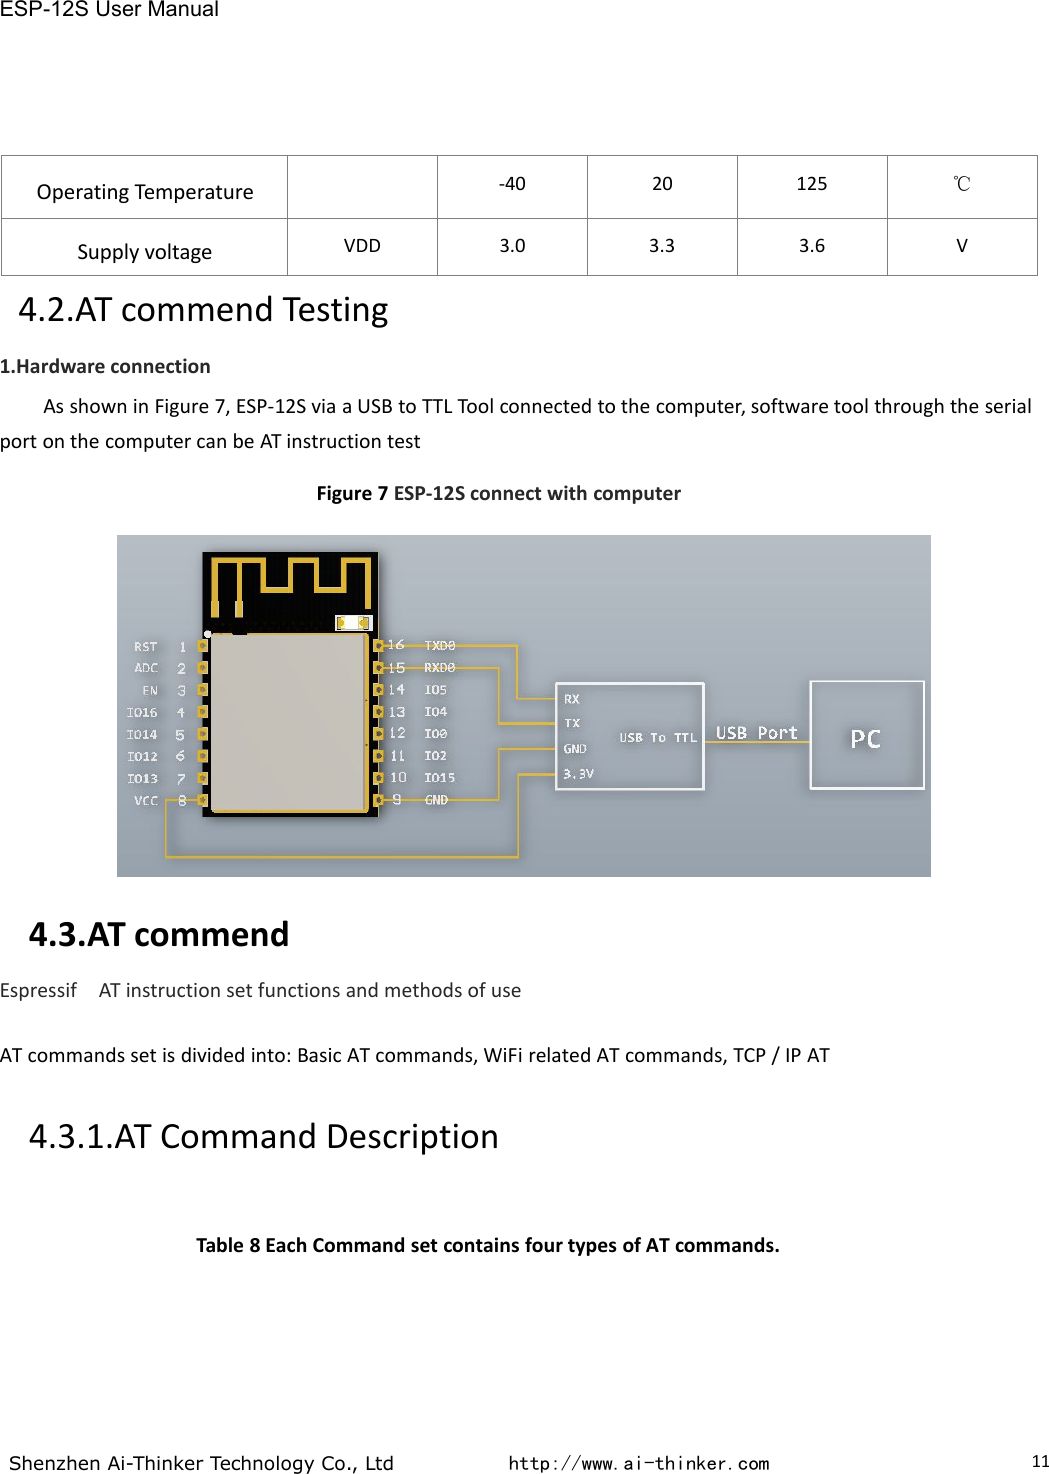 ESP-12S User ManualShenzhen Ai-Thinker Technology Co., Ltd http://www.ai-thinker.com11Operating Temperature-4020125℃Supply voltageVDD3.03.33.6V4.2.AT commend Testing1.Hardware connectionAs shown in Figure 7, ESP-12S via a USB to TTL Tool connected to the computer, software tool through the serialport on the computer can be AT instruction testFigure 7 ESP-12S connect with computer4.3.AT commendEspressif AT instruction set functions and methods of useAT commands set is divided into: Basic AT commands, WiFi related AT commands, TCP / IP AT4.3.1.AT Command DescriptionTable 8 Each Command set contains four types of AT commands.